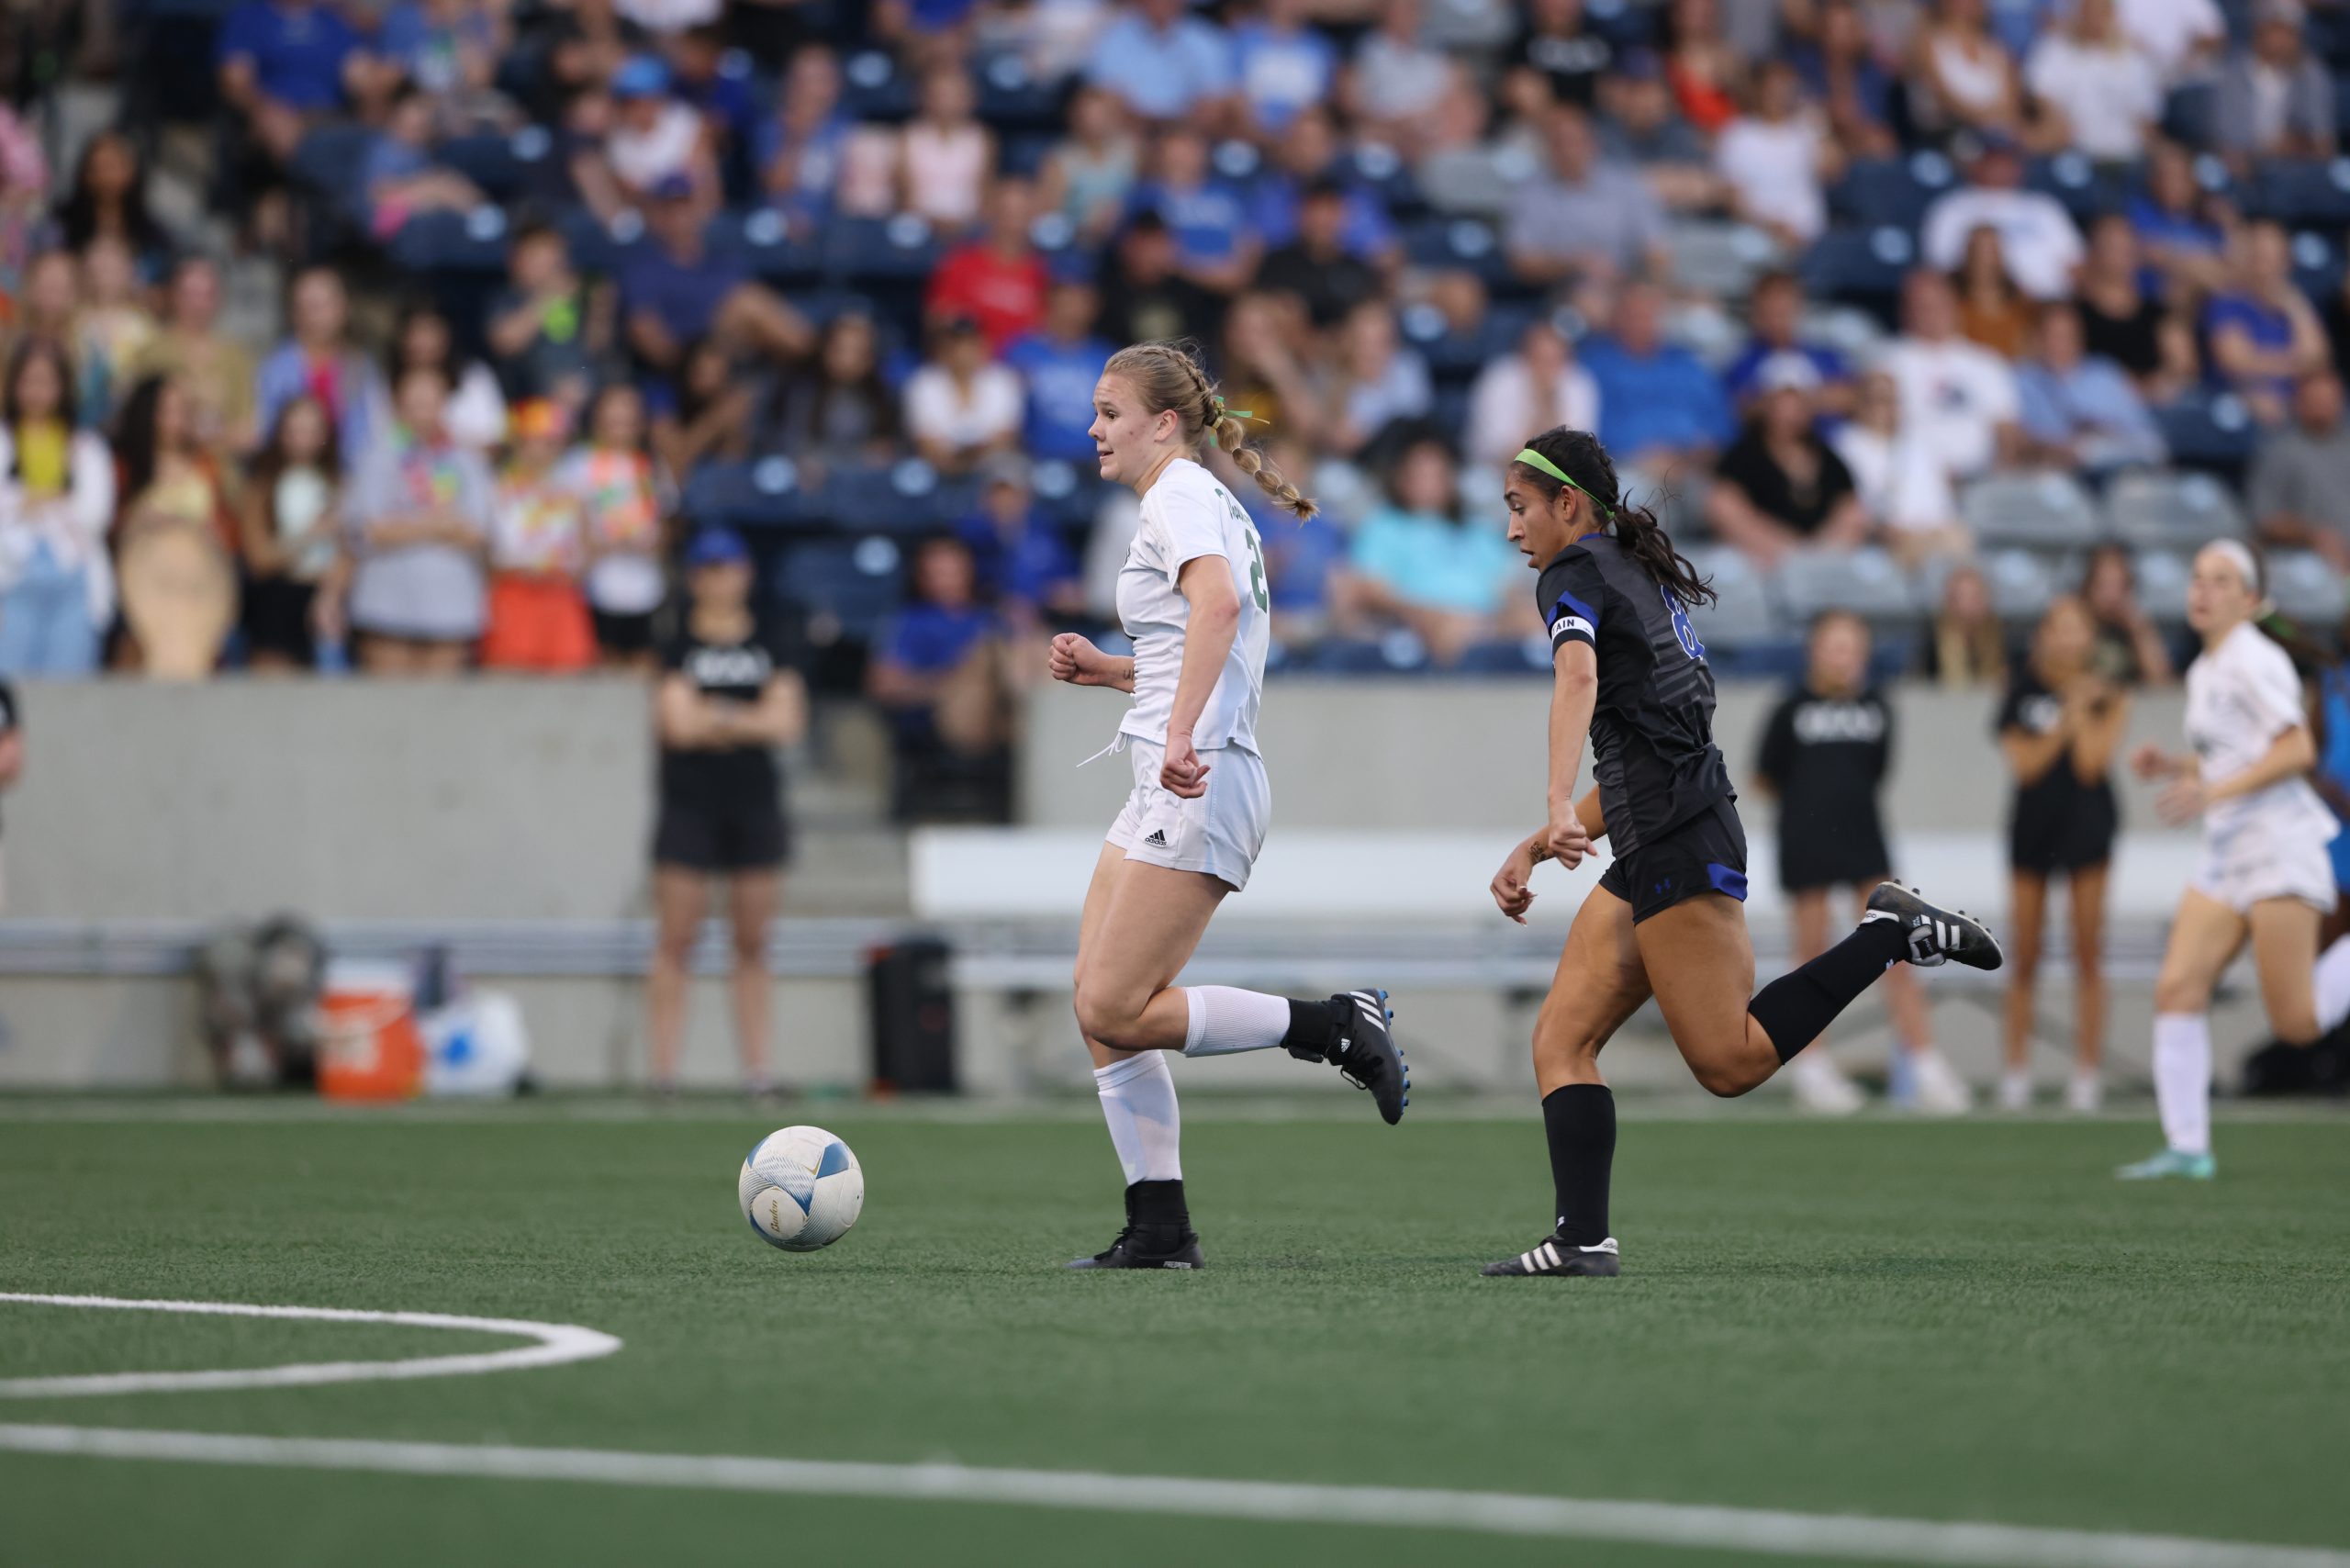 Lincoln Pius X plays against Omaha Marian in the first round of the Class A girls Nebraska state soccer tournament at Morrison Stadium on Monday, May 9, 2022, in Omaha, Neb.  (By Rebecca S. Gratz)